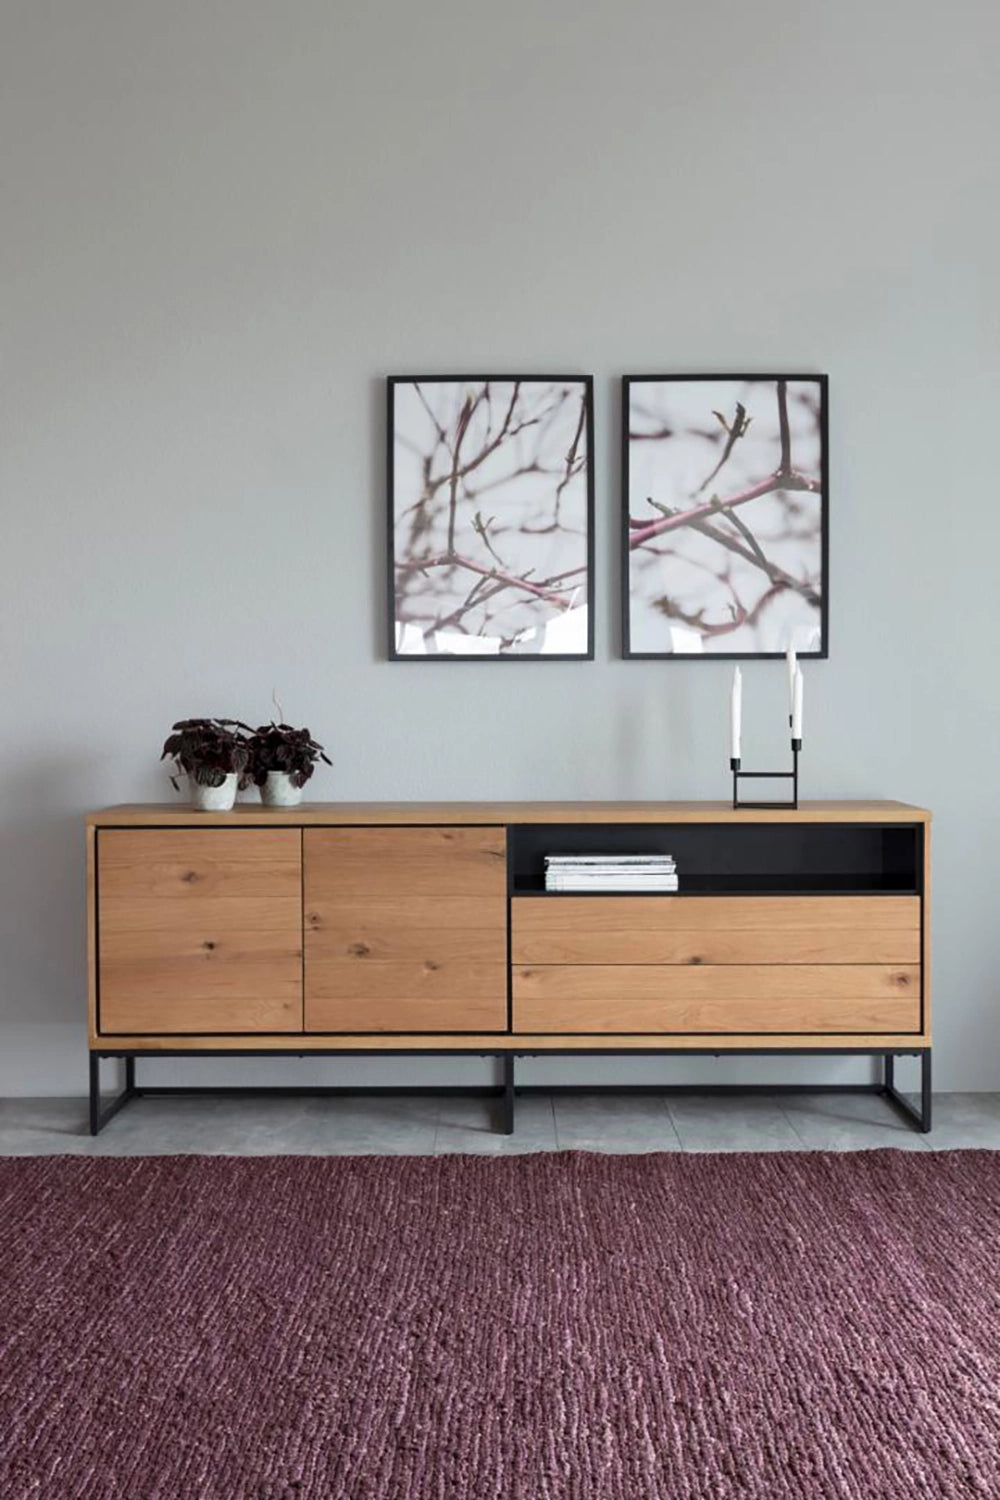 Lara Large Sideboard in Matte Oak Finish with Wall Frame and Upholstered Rug in Living Room Setting